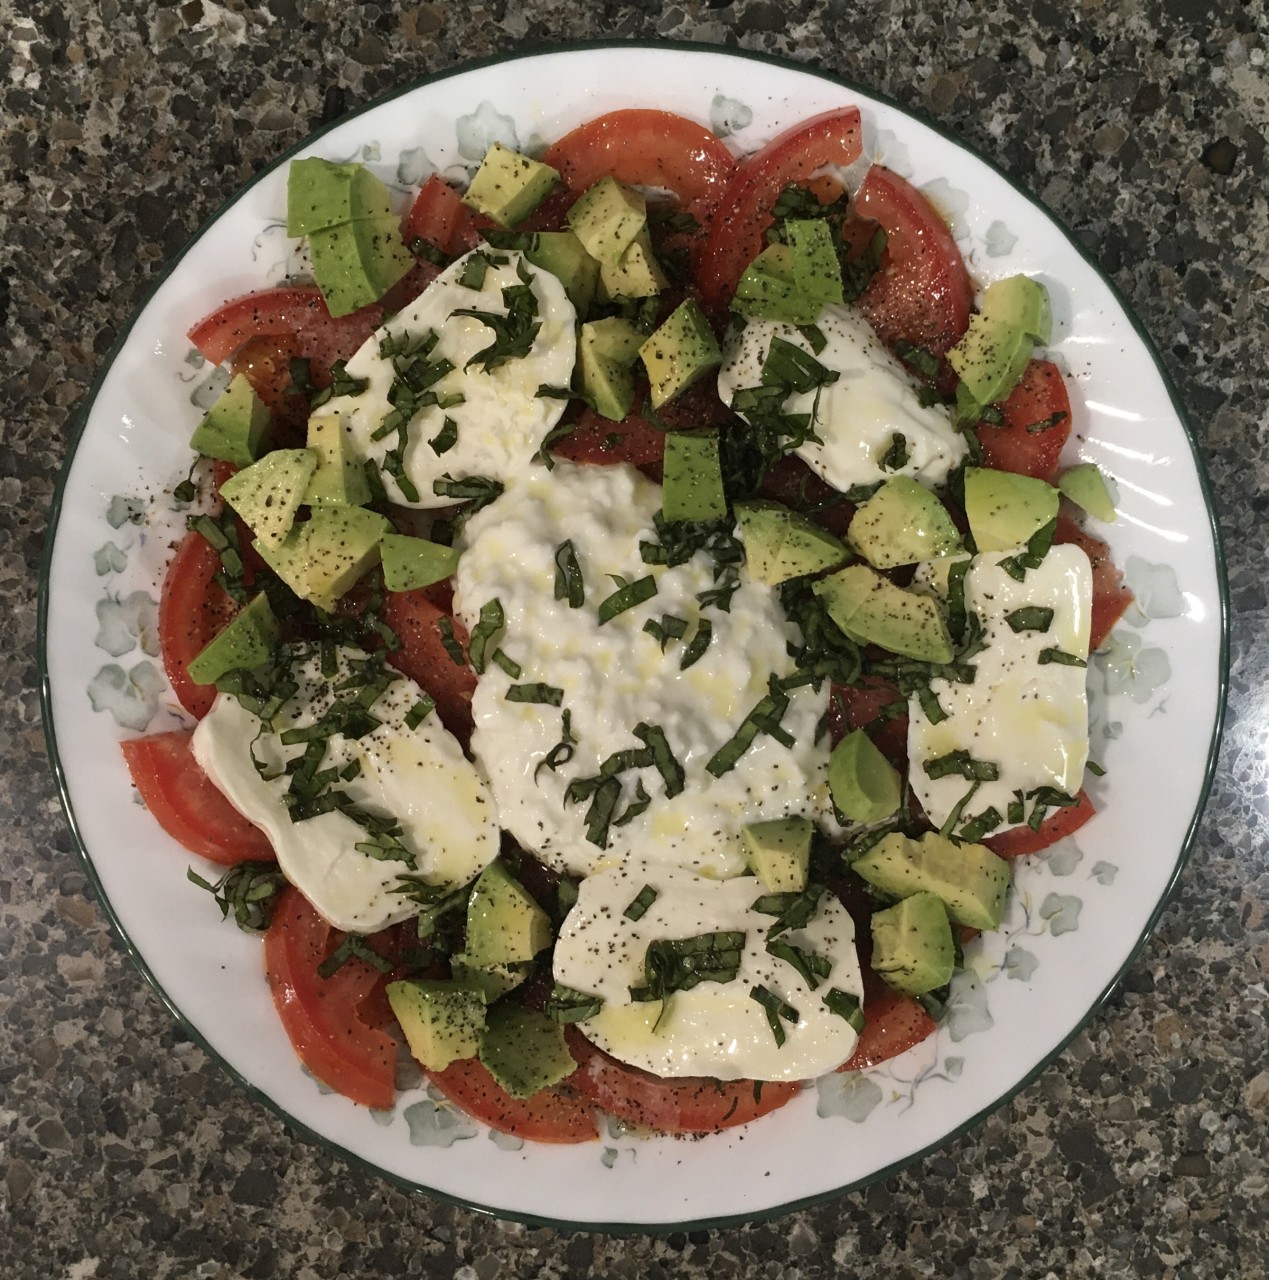 <a class="bx-tag" rel="tag" href="https://streetloc.com/view-channel-profile/whatsforsnack"><s>#</s><b>whatsforsnack</b></a> … but it eats like a meal. Caprese with both 4% Cottage Cheese and Fresh Mozzarella, Vine Ripe Tomatoes, Fresh Basil, and Avocado, drizzled in Extra Virgin Olive Oil, Salt and Pepper to taste. <a class="bx-tag" rel="tag" href="https://streetloc.com/view-channel-profile/keto"><s>#</s><b>keto</b></a> <a class="bx-tag" rel="tag" href="https://streetloc.com/view-channel-profile/healthyeats"><s>#</s><b>healthyeats</b></a> <a class="bx-tag" rel="tag" href="https://streetloc.com/view-channel-profile/healthymito"><s>#</s><b>healthymito</b></a>